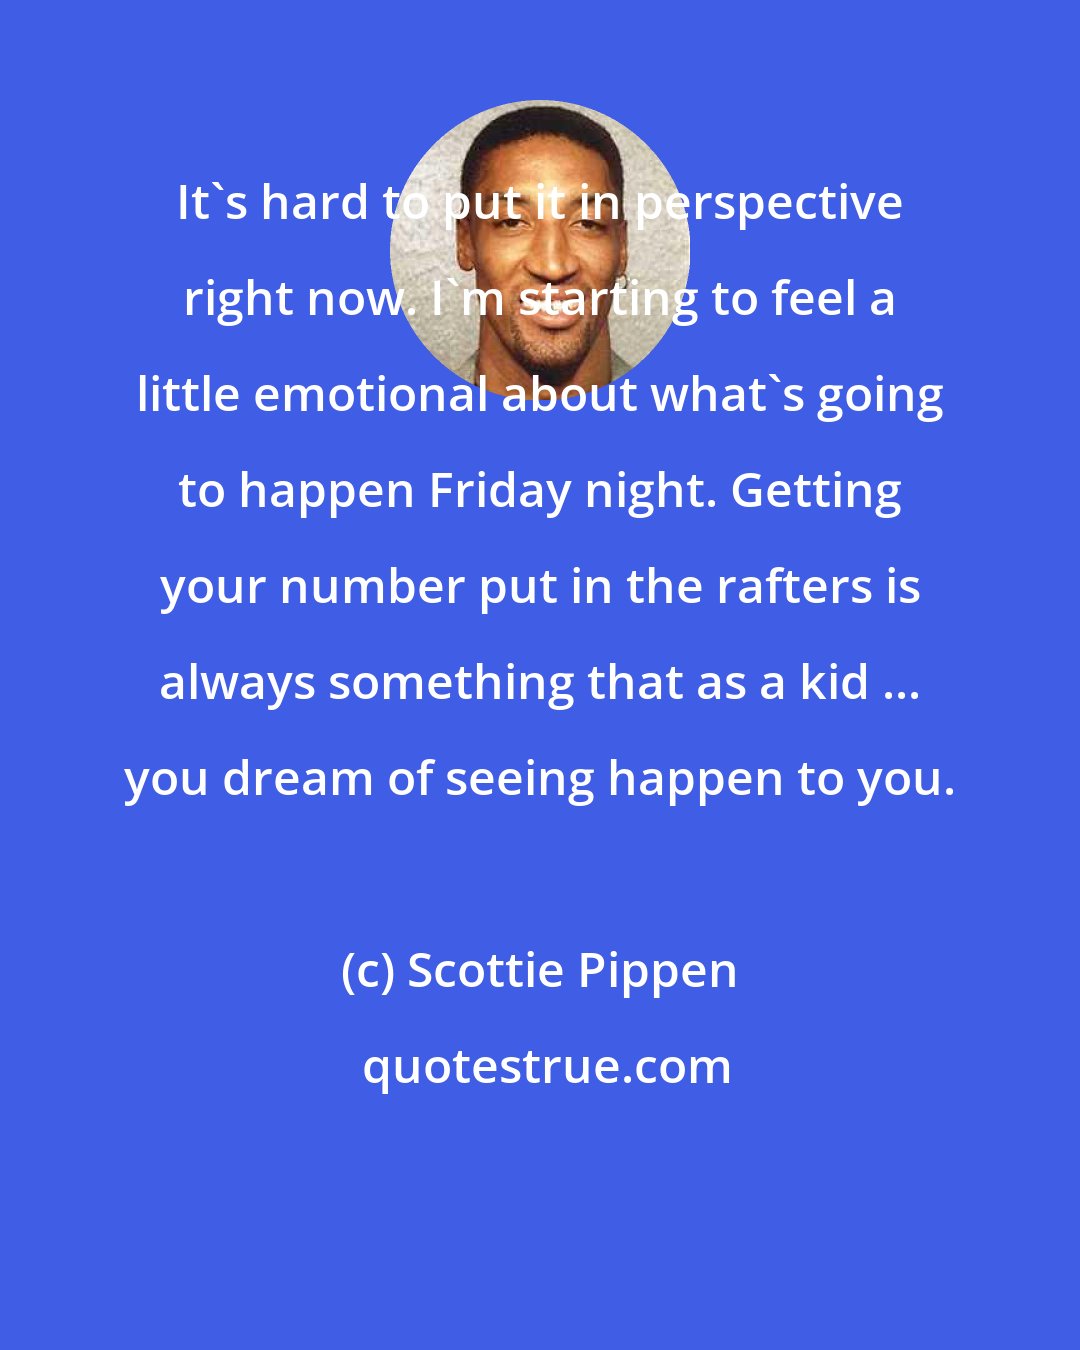 Scottie Pippen: It's hard to put it in perspective right now. I'm starting to feel a little emotional about what's going to happen Friday night. Getting your number put in the rafters is always something that as a kid ... you dream of seeing happen to you.